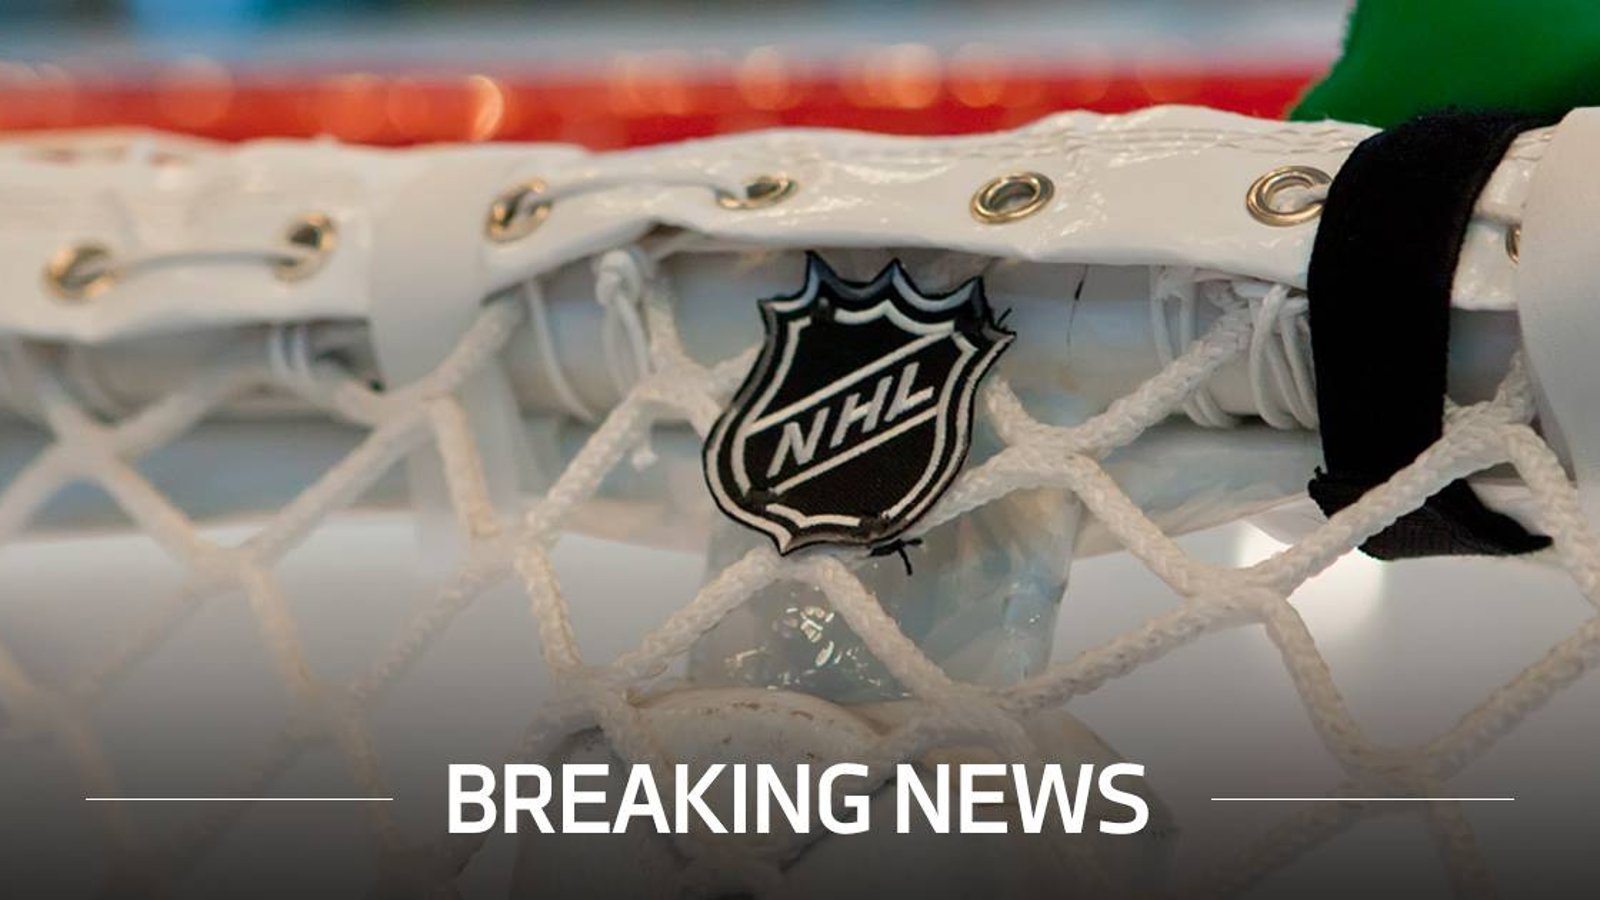 Breaking: NHL veteran is medically cleared but released from PTO